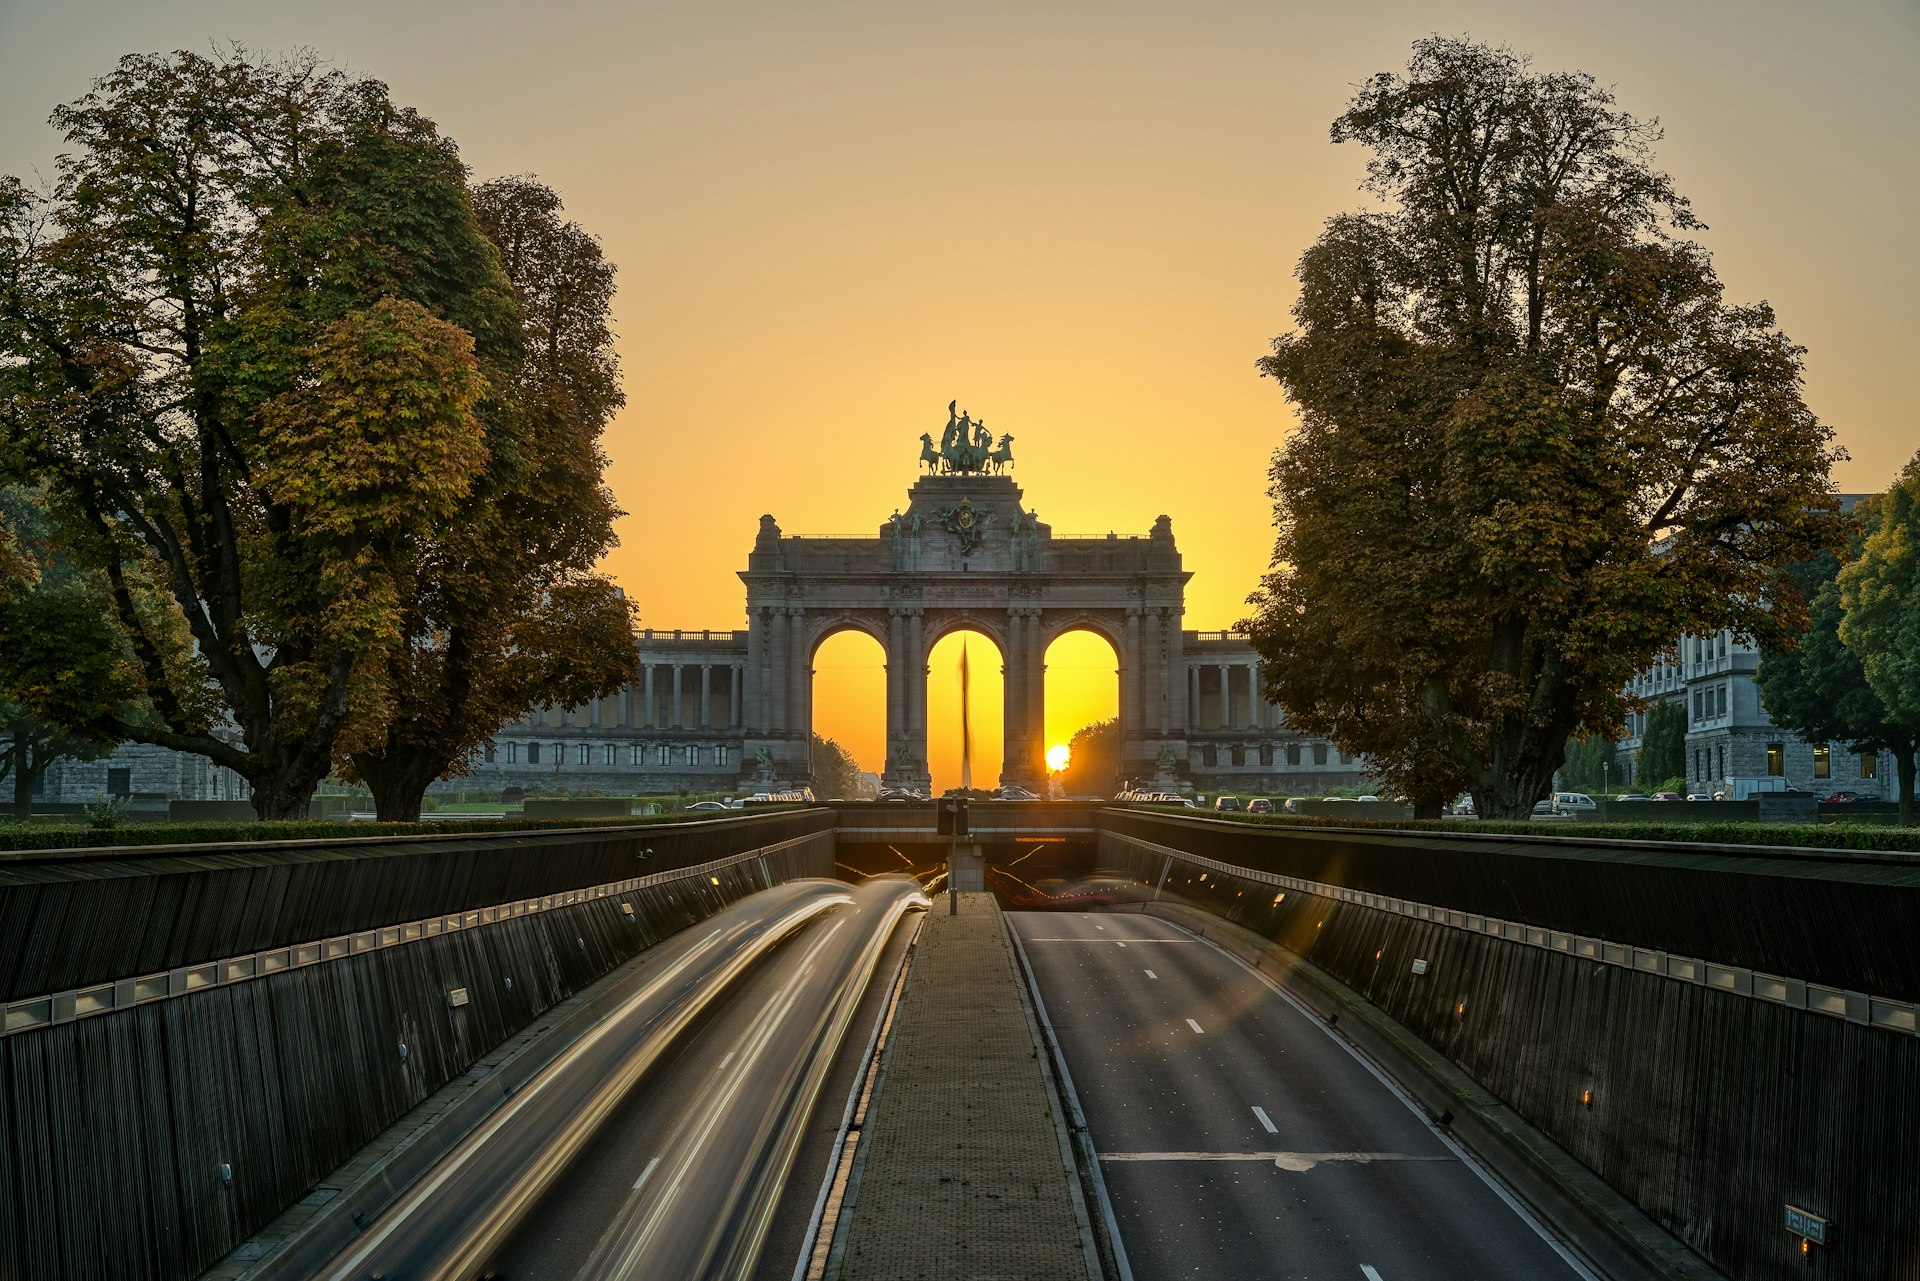 500px Photo ID: 16939965 - Sunrise @ Cinquantenaire Park with incoming traffic to Brussels